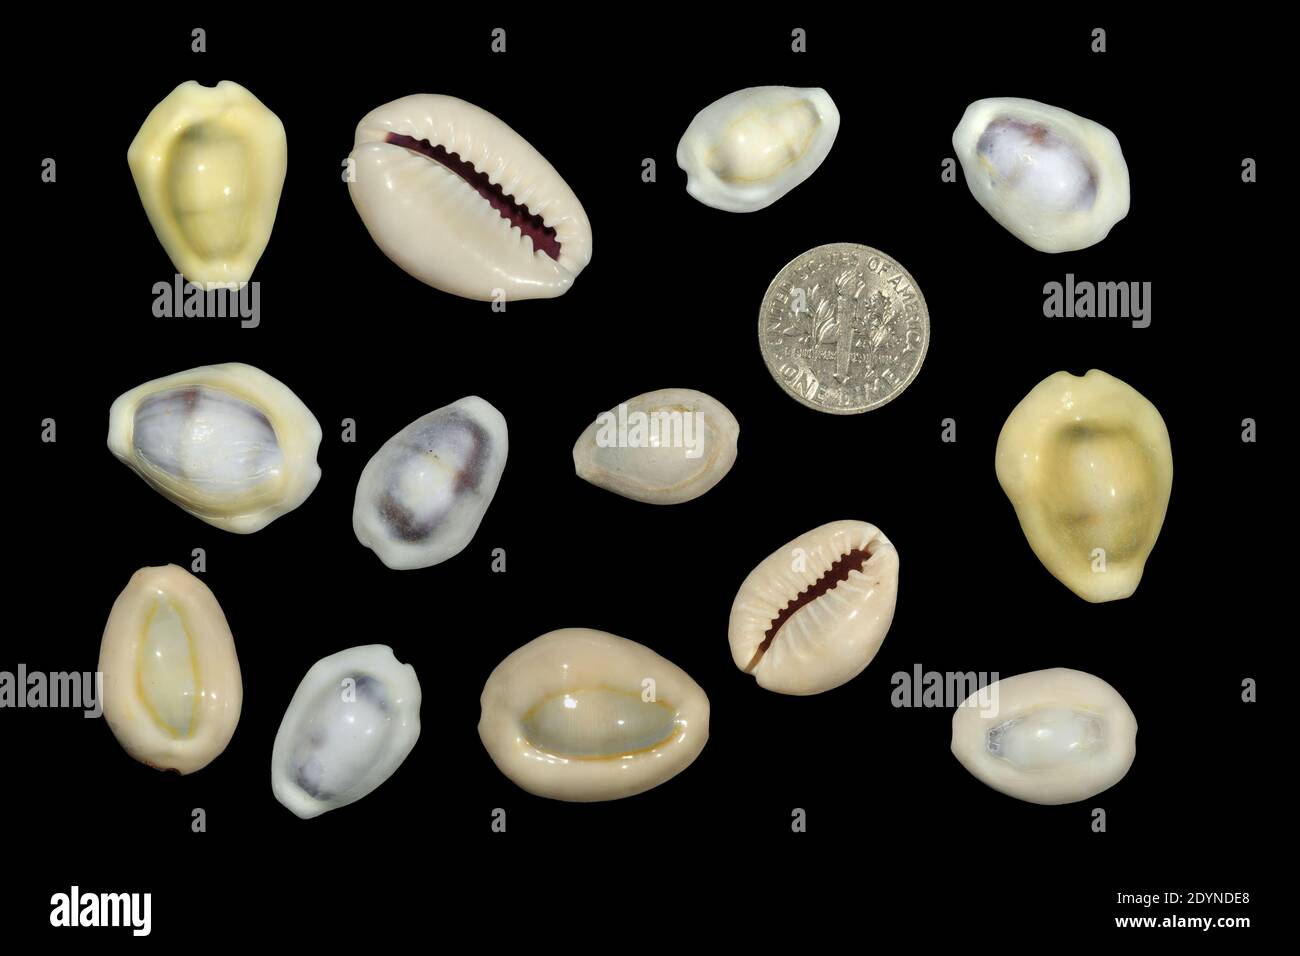 A collection of 'money cowrie' shells, used as currency on some Pacific and Indian Ocean countries, with a US dime for scale Stock Photo